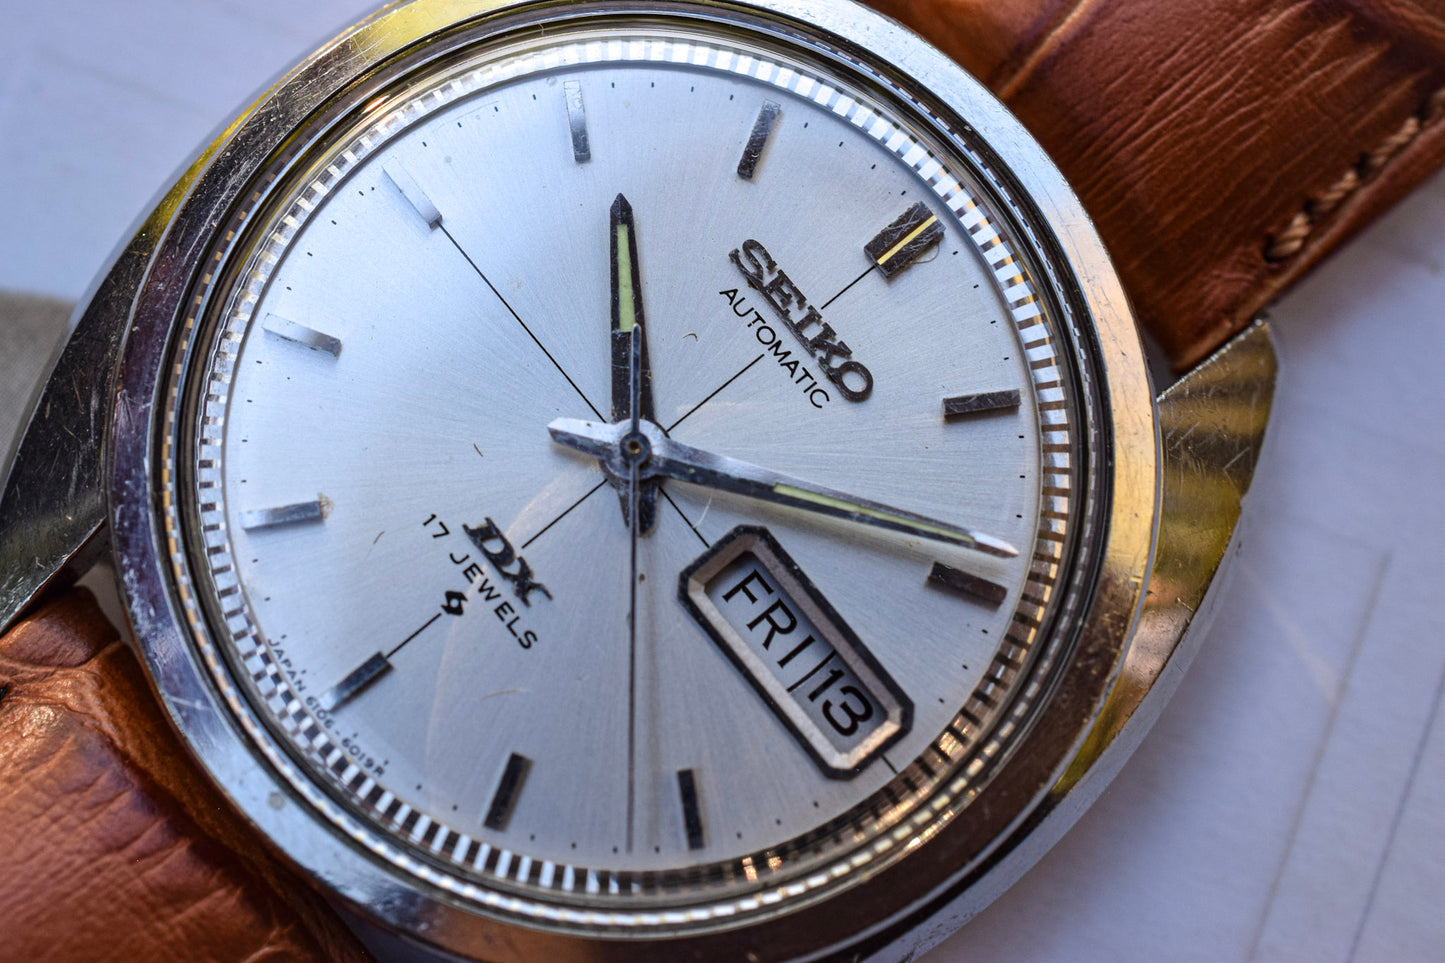 1972 Seiko DX Automatic Day-Date